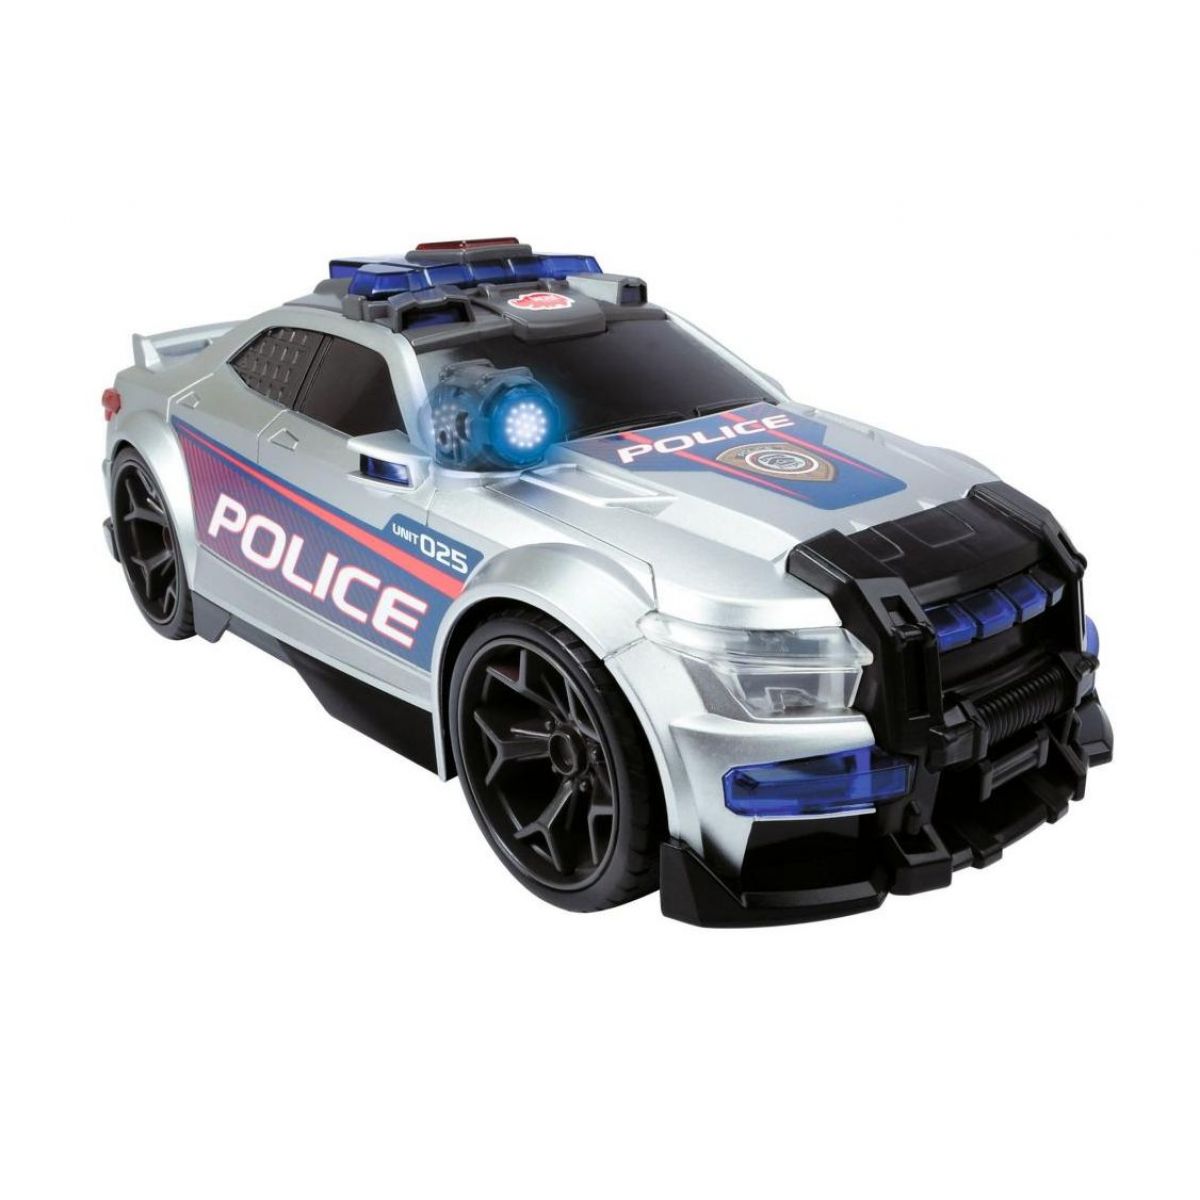 Dickie Action Series Policejní auto Street Force 33cm